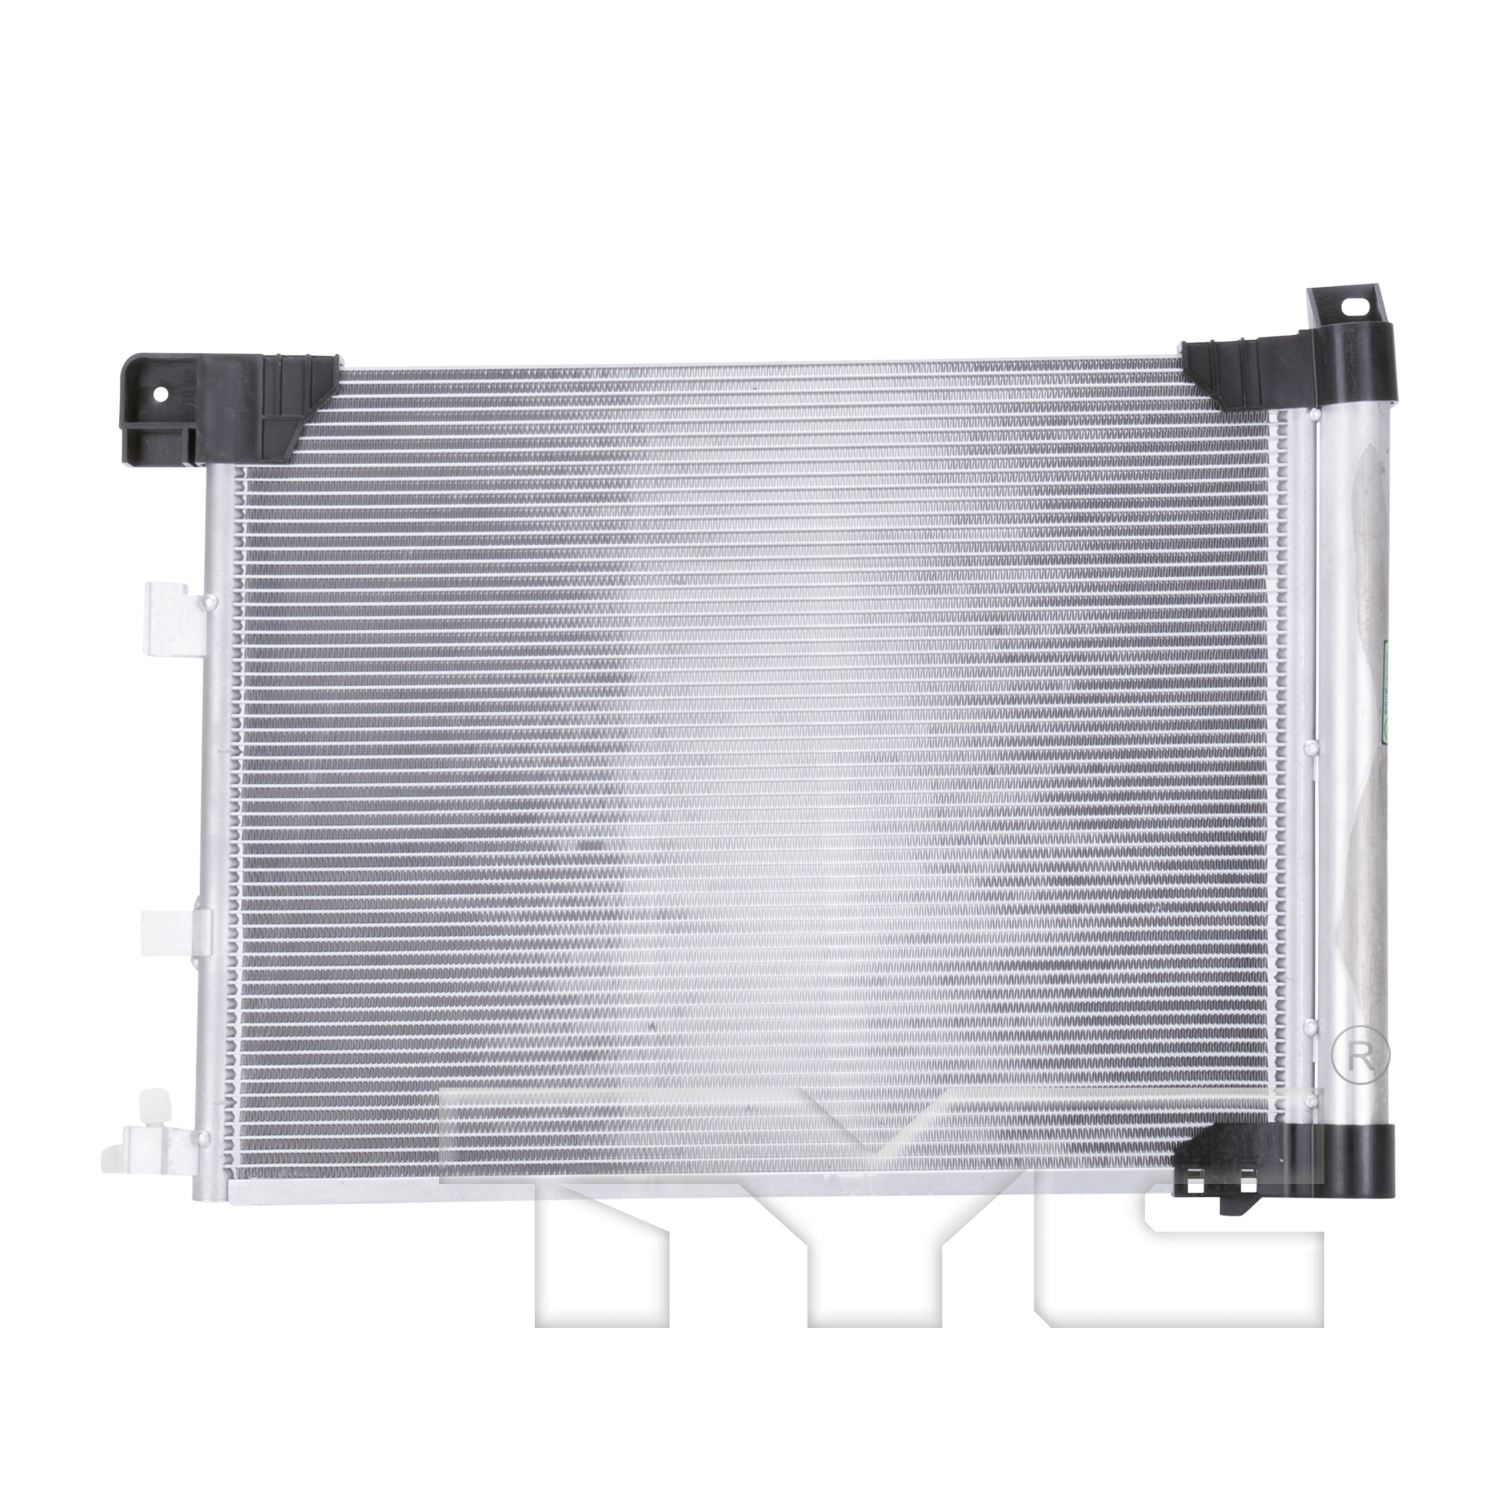 Aftermarket AC CONDENSERS for NISSAN - SENTRA, SENTRA,13-19,Air conditioning condenser